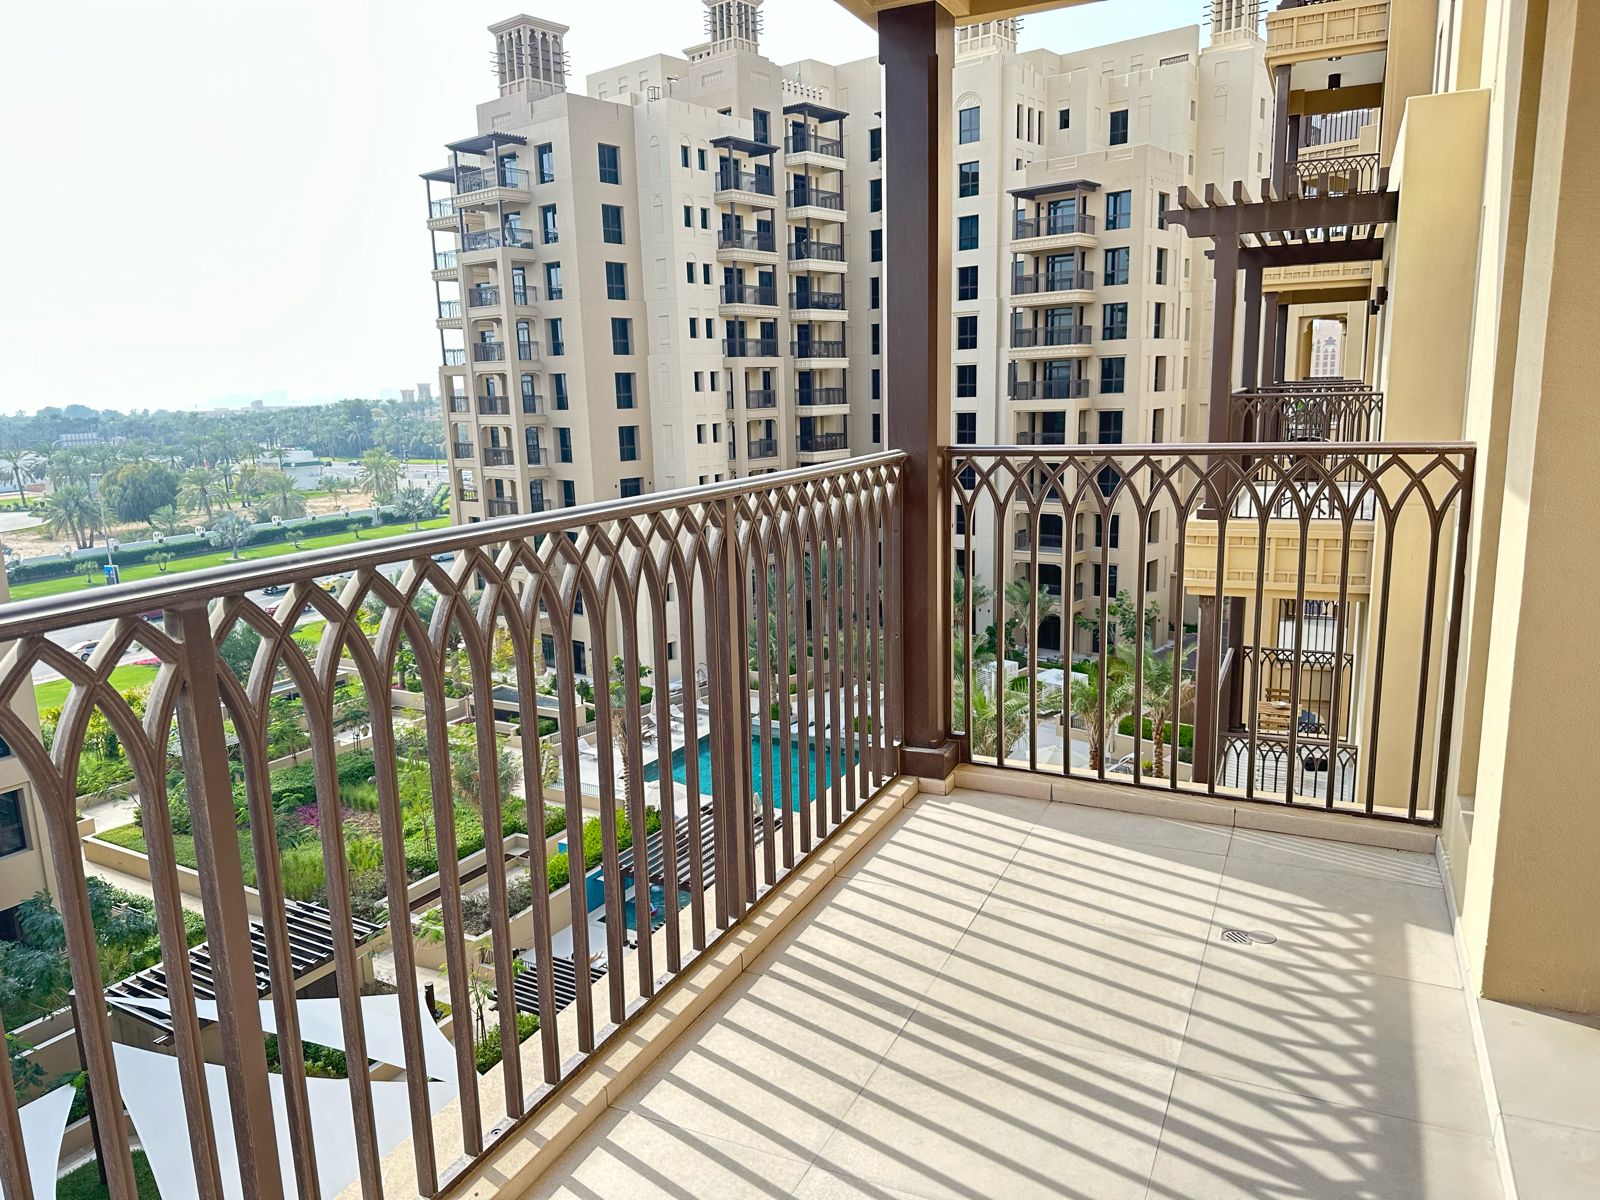 Pool and Park View | High Floor | Best Deal